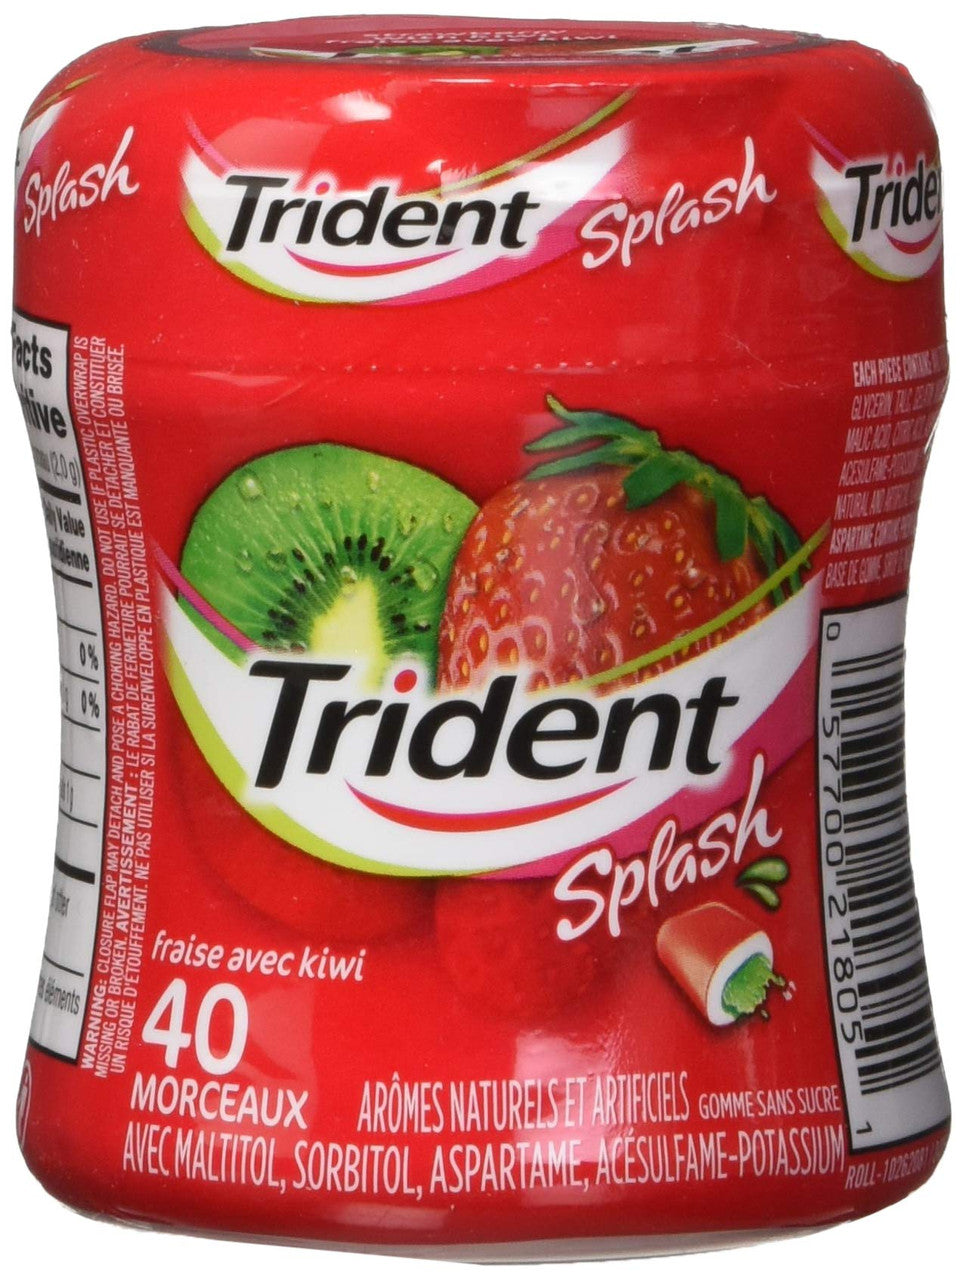 Trident Splash Strawberry Kiwi Bottle Candy, 6 Count, 40 Pieces per Bottle, {Imported from Canada}